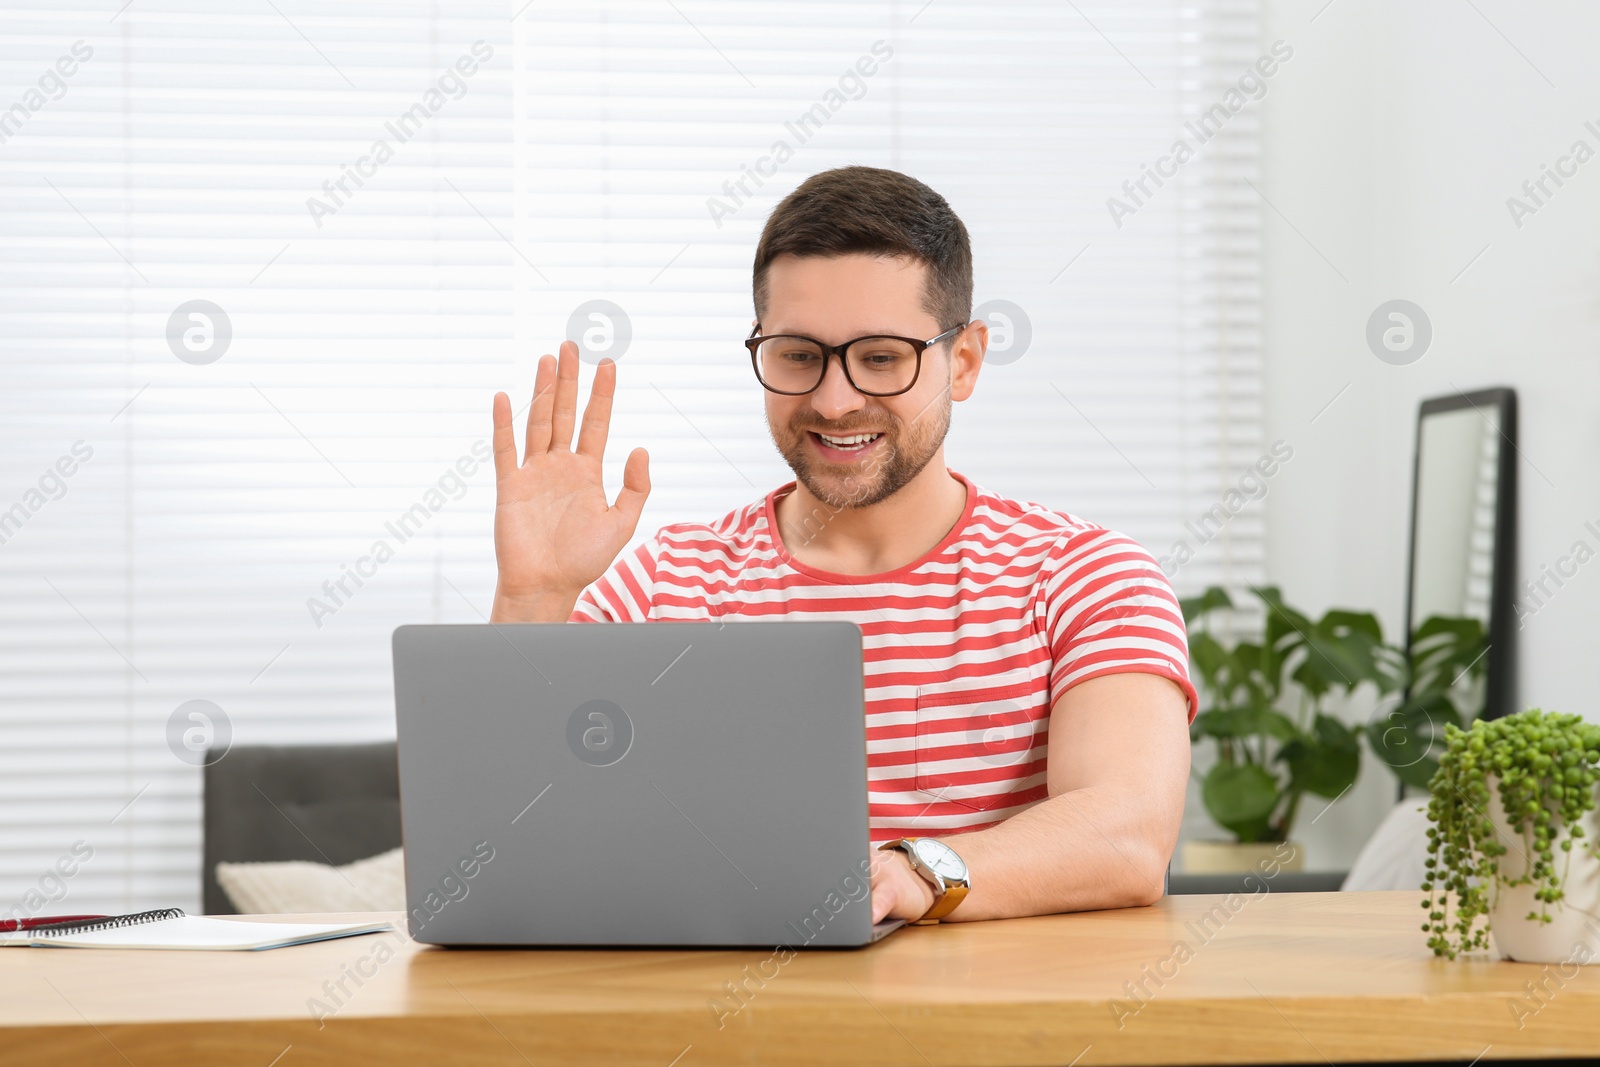 Photo of Man having video chat via laptop at wooden table at home